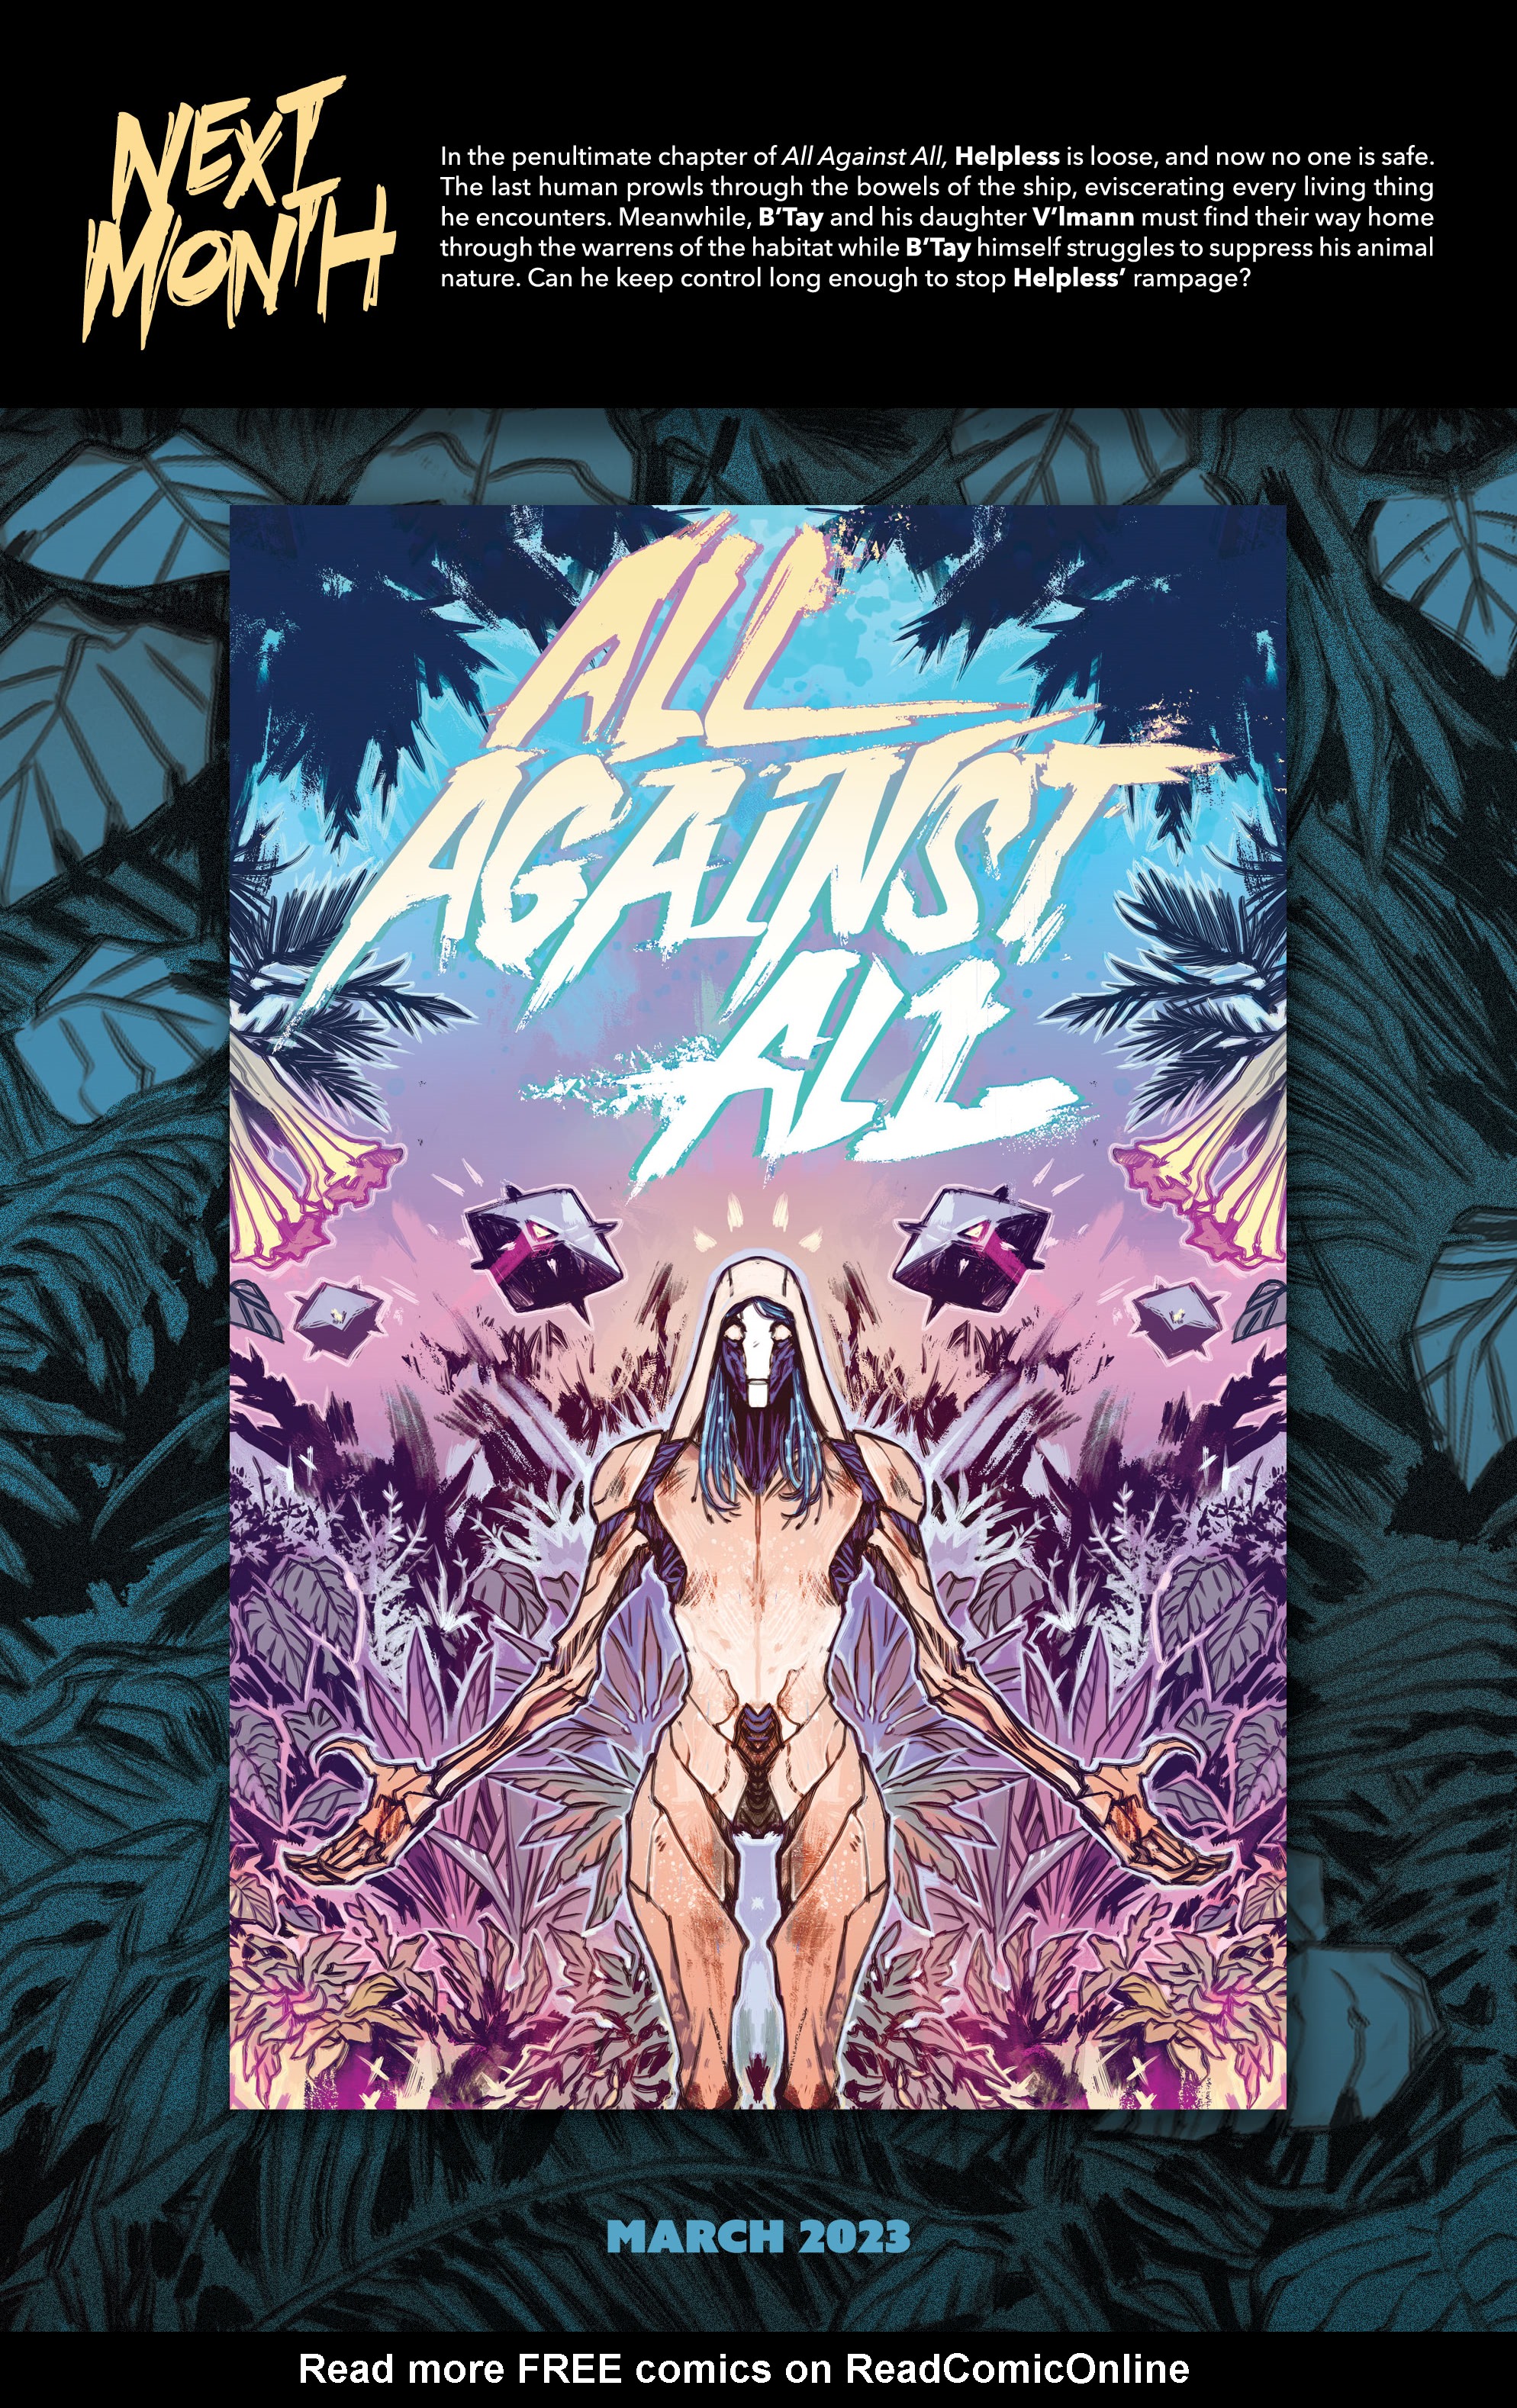 Read online All Against All comic -  Issue #3 - 25